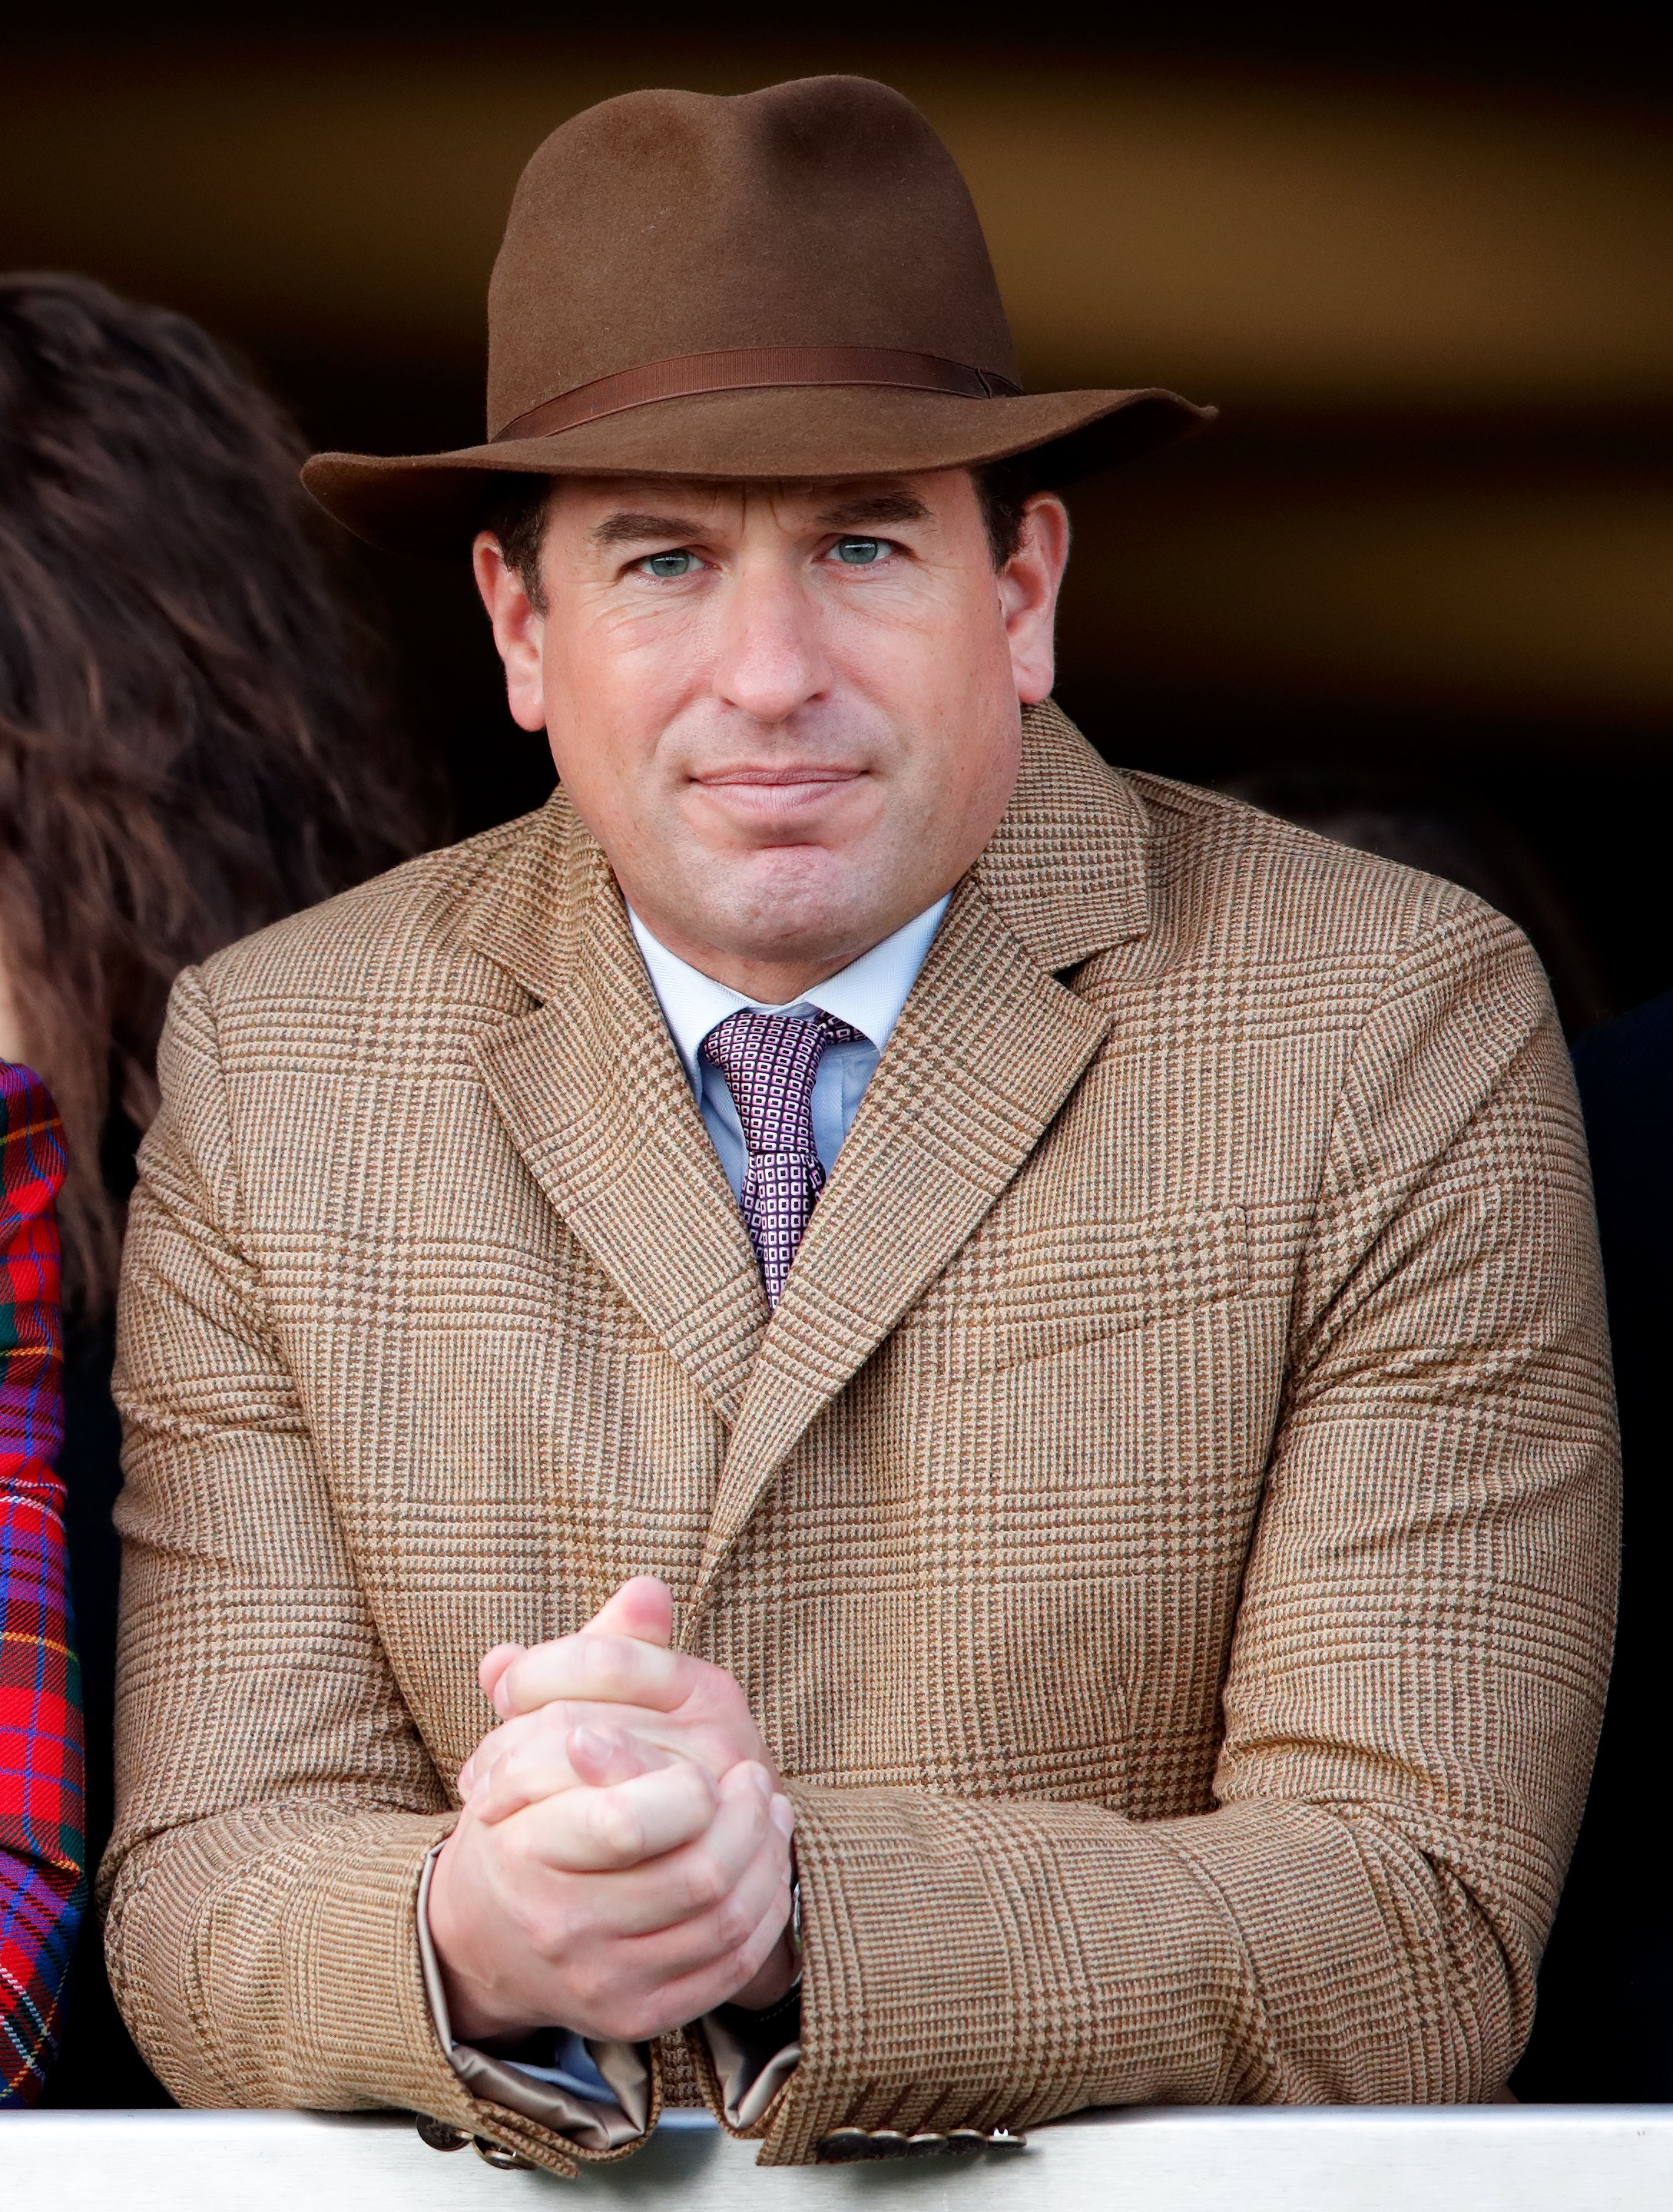 Peter Phillips attends day 4 'Gold Cup Day' of the Cheltenham Festival 2020 at Cheltenham Racecourse on March 13, 2020 in Cheltenham, England | Photo: Getty Images